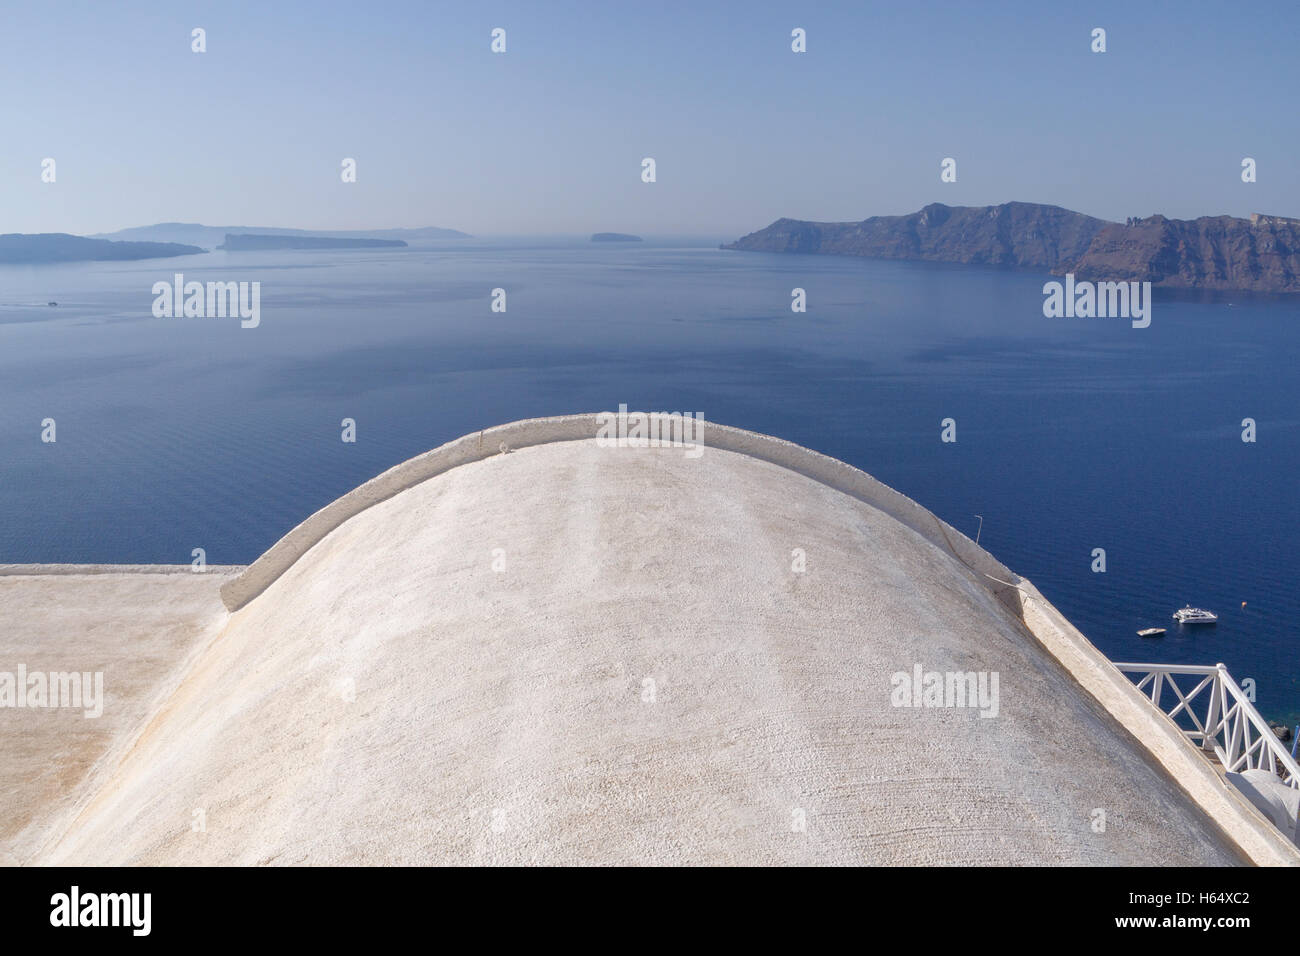 roof of traditional Cycladic house in Oia on Santorini Stock Photo